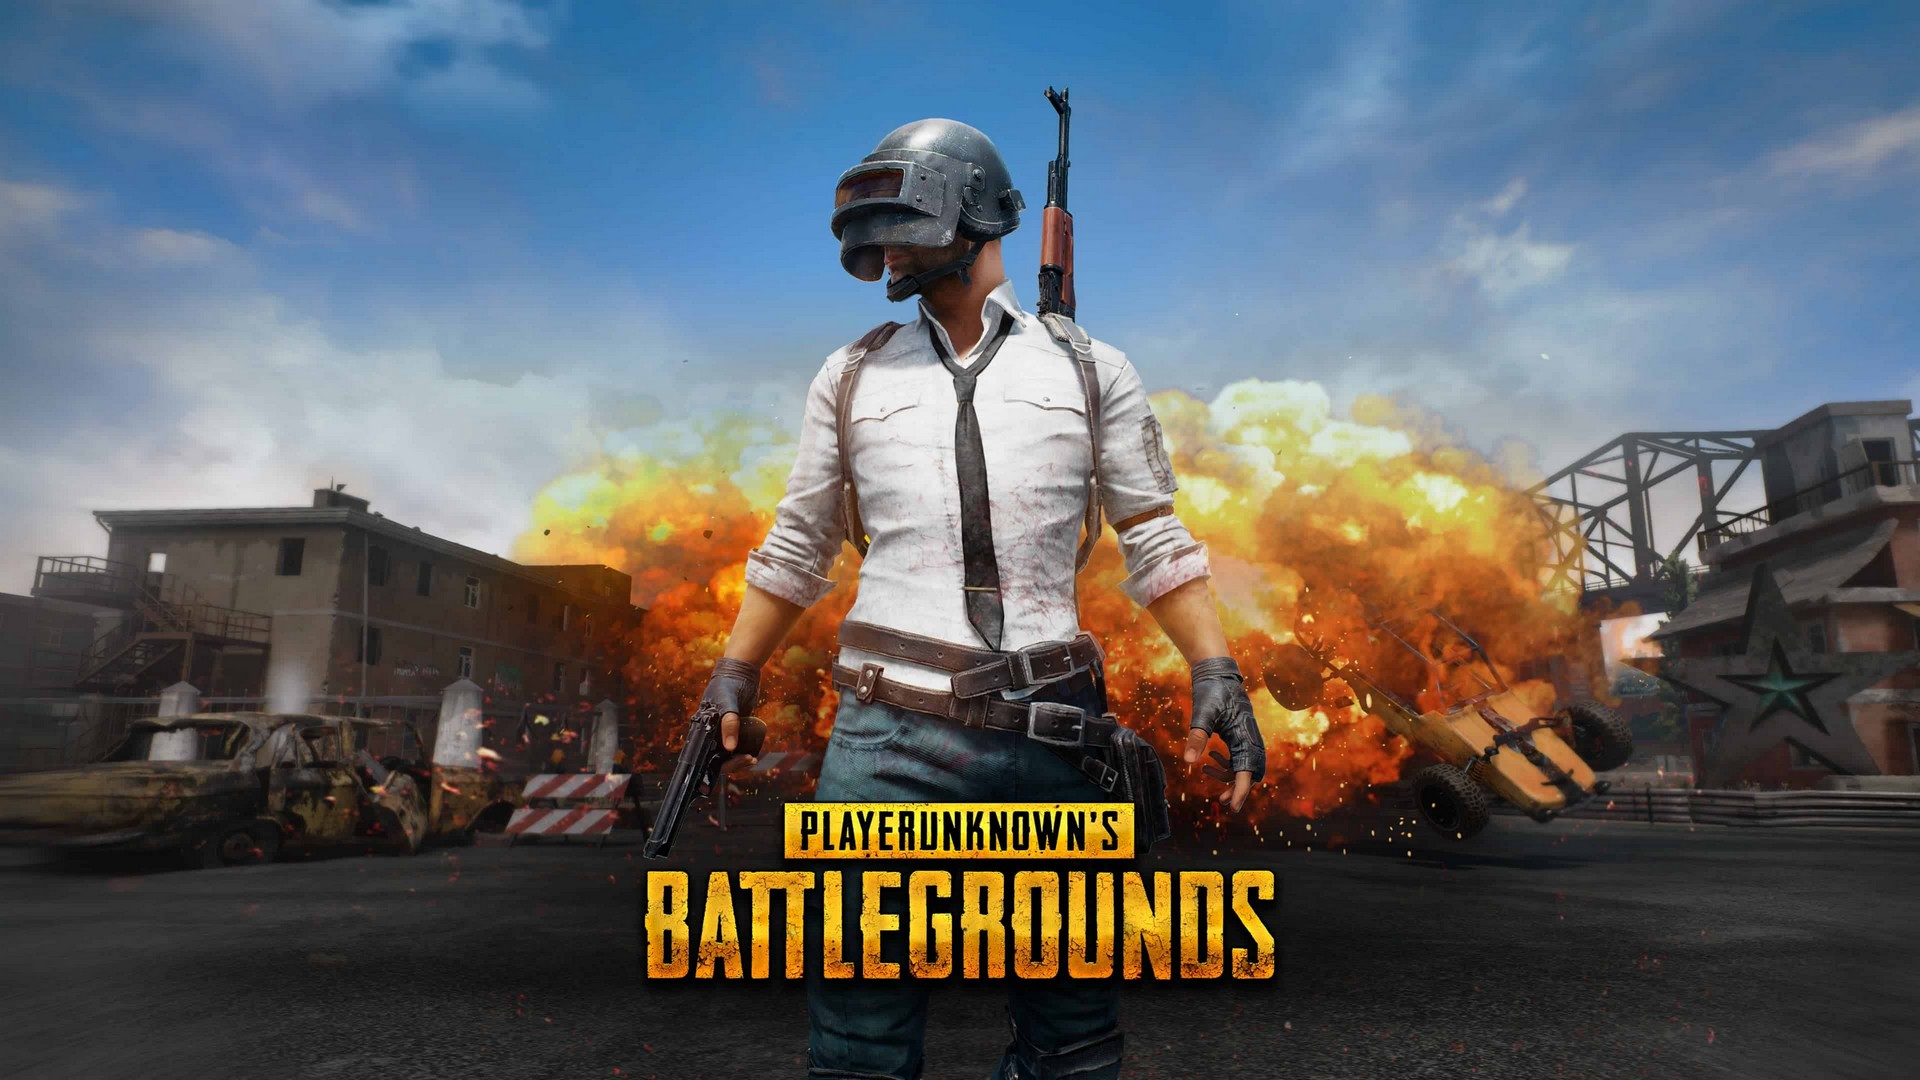 PUBG Wallpaper with image resolution 1920x1080 pixel. You can use this wallpaper as background for your desktop Computer Screensavers, Android or iPhone smartphones